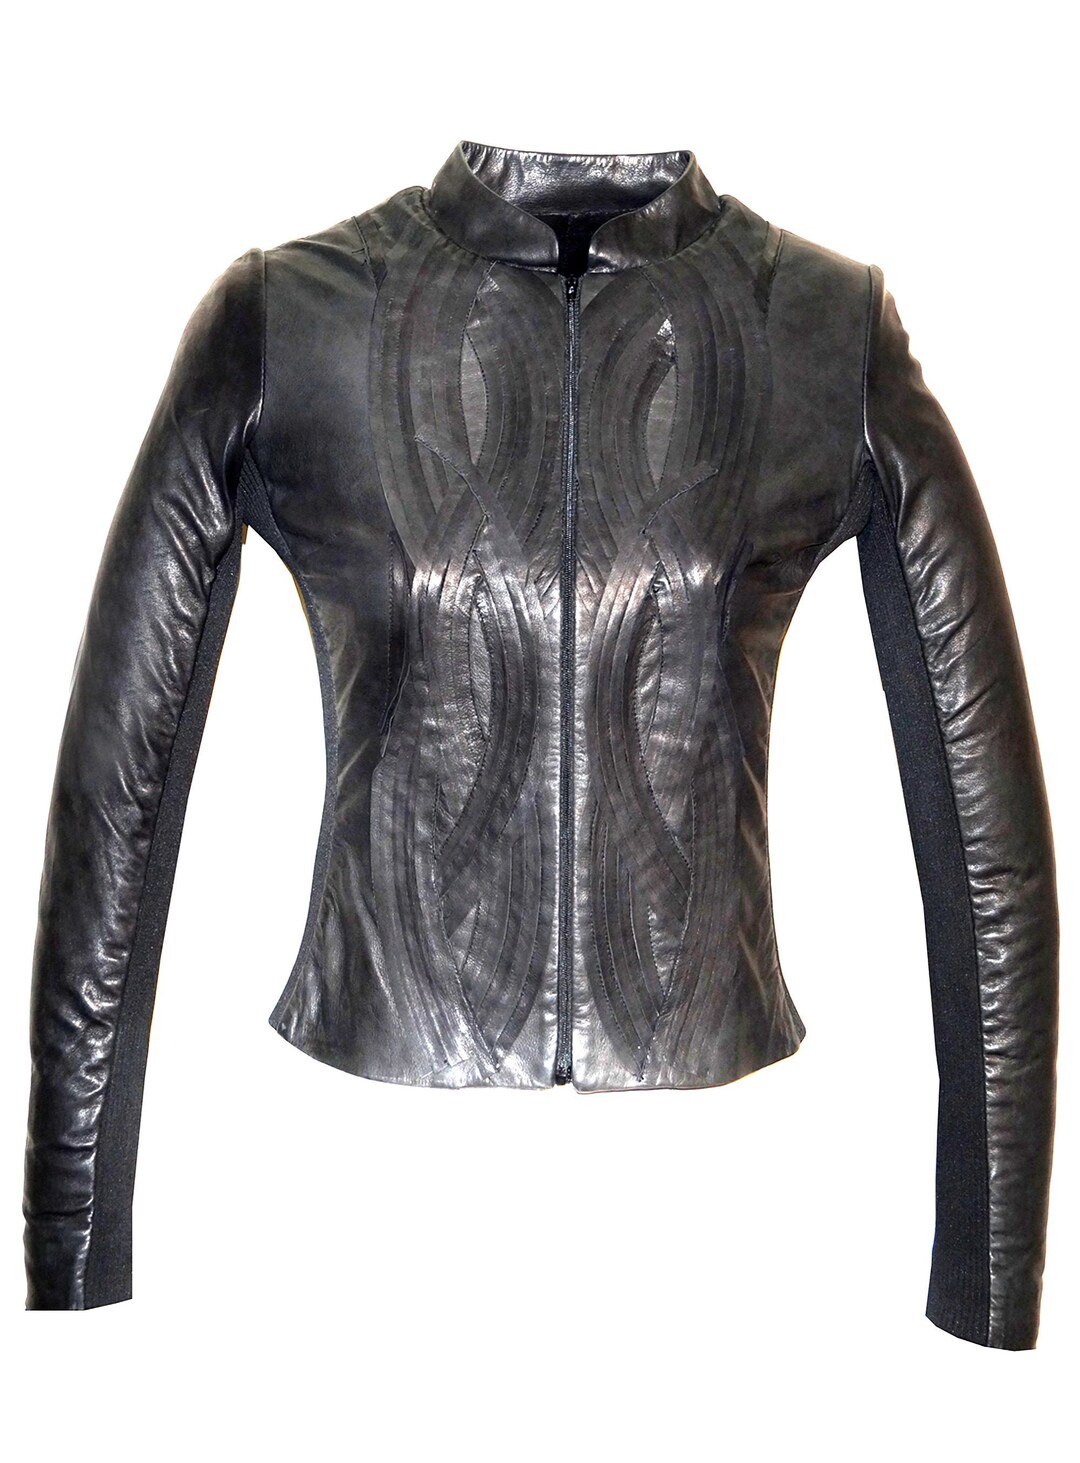 Flakes Designer Lamb Leather Woman Jacket With Spiral Design - Etsy